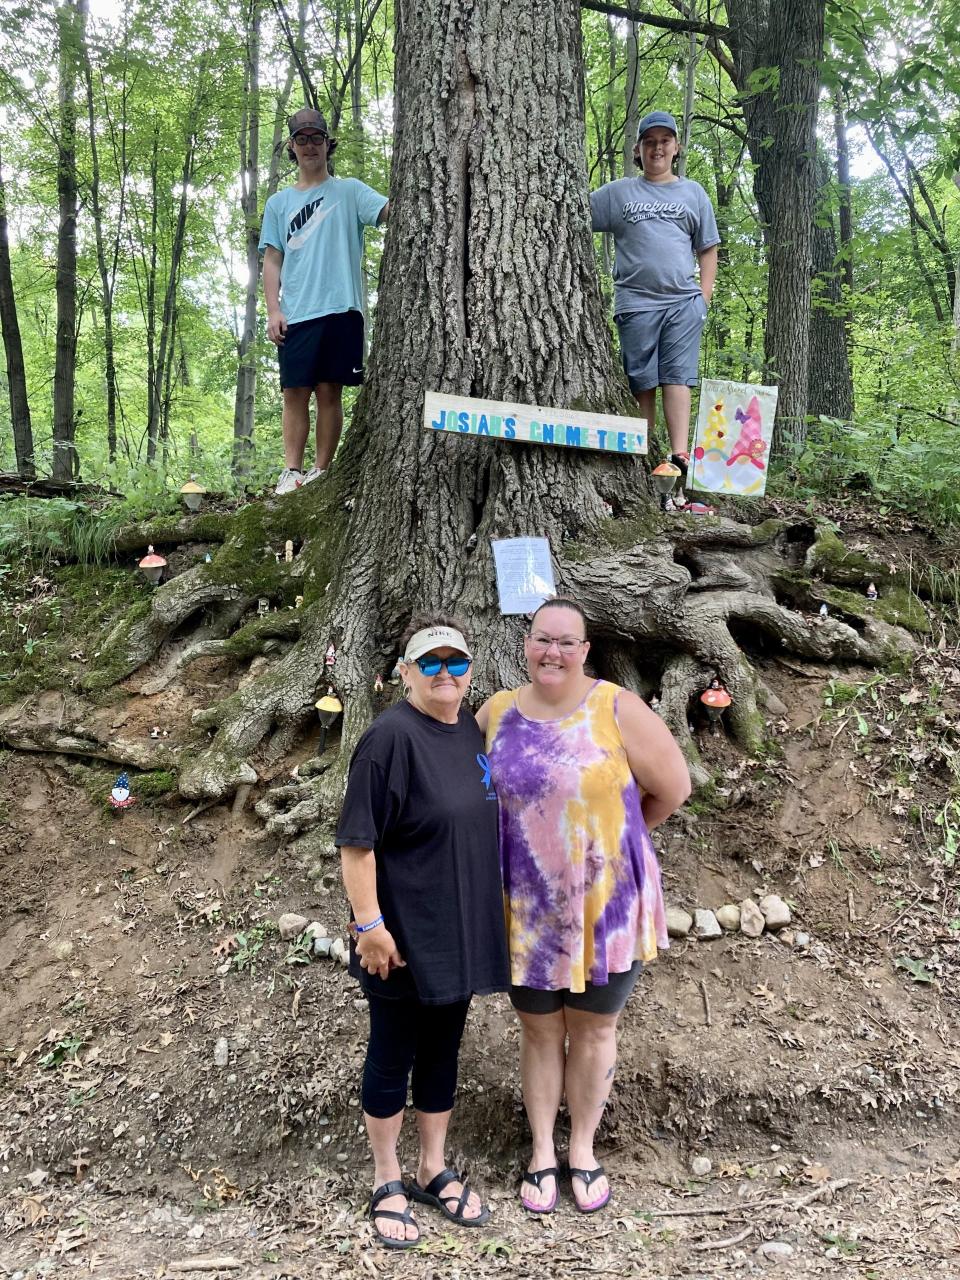 Josiah Moore (top left), his cousin Caleb Northrup (top right), his grandma Georgetta Marnell (bottom left) and his mom Danielle Moore (bottom right) pose in front of Josiah's Gnome Tree on Chambers Road in Pinckney.